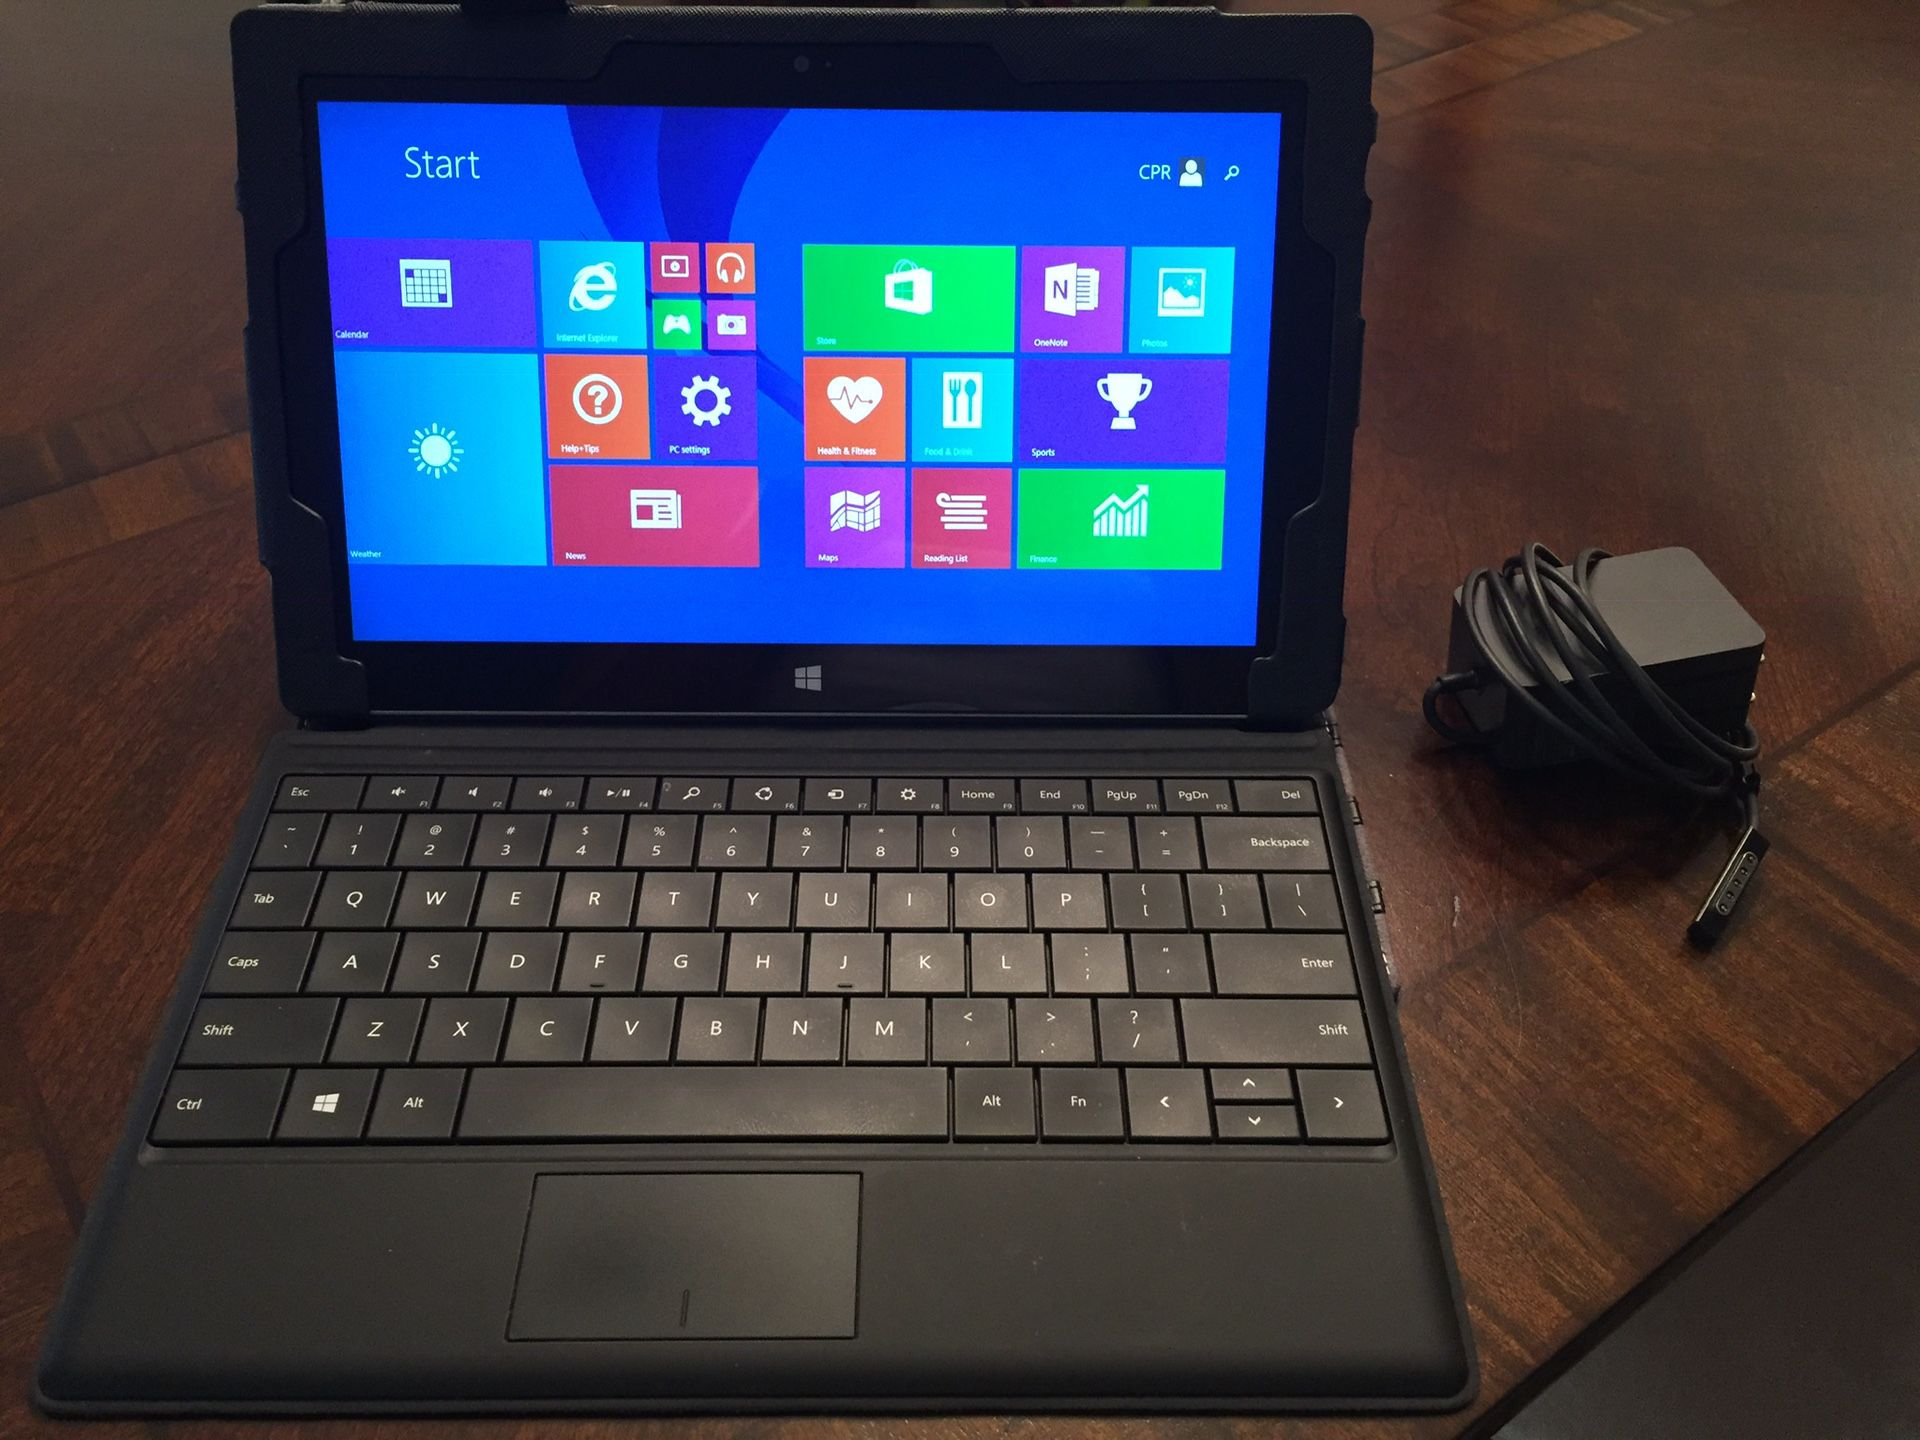 Microsoft Surface with keyboard, case and charger